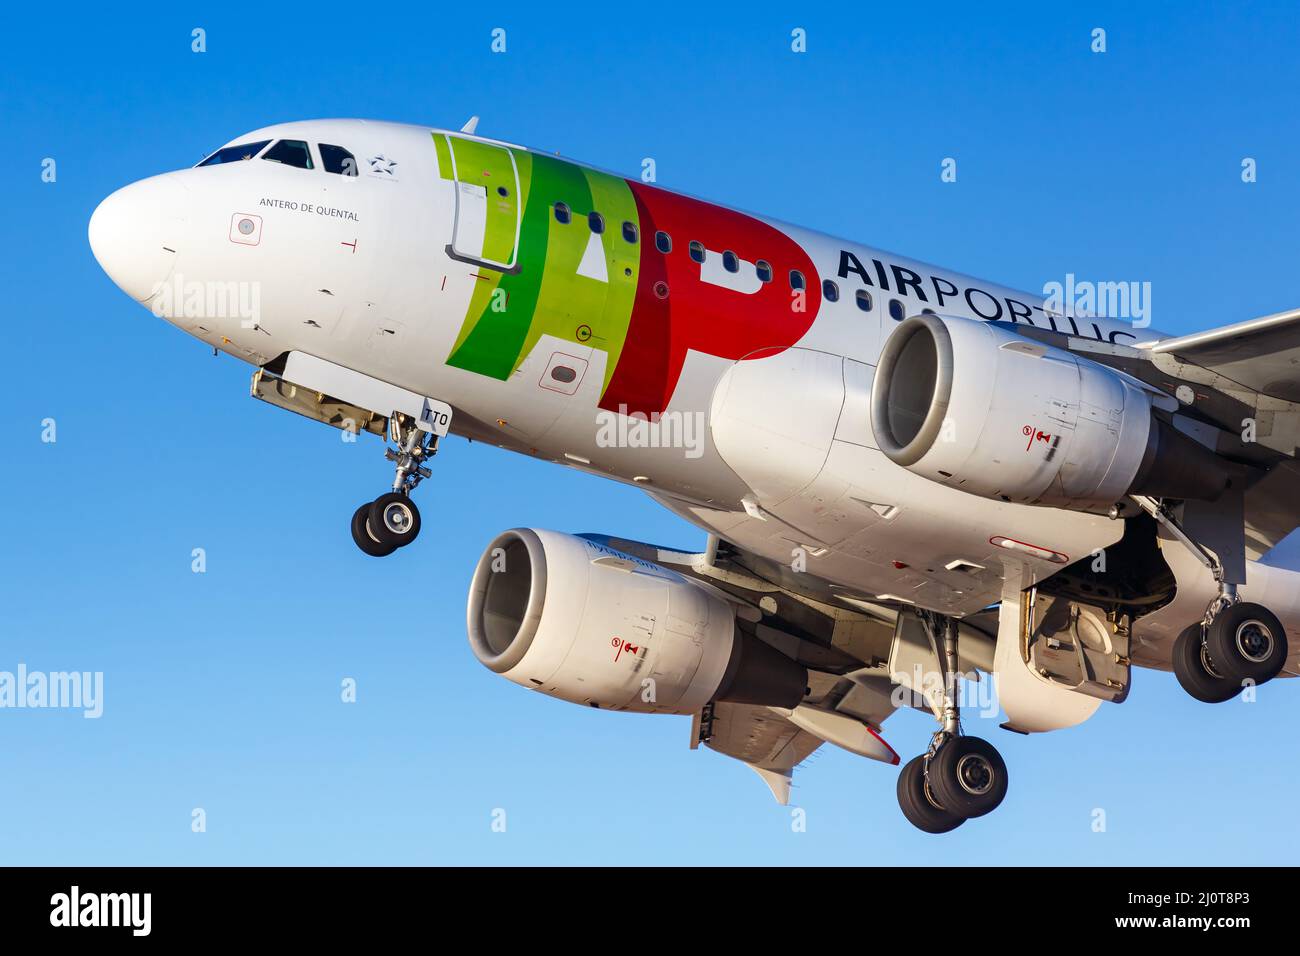 TAP Air Portugal Airbus A319 aircraft Faro Airport in Portugal Stock Photo  - Alamy